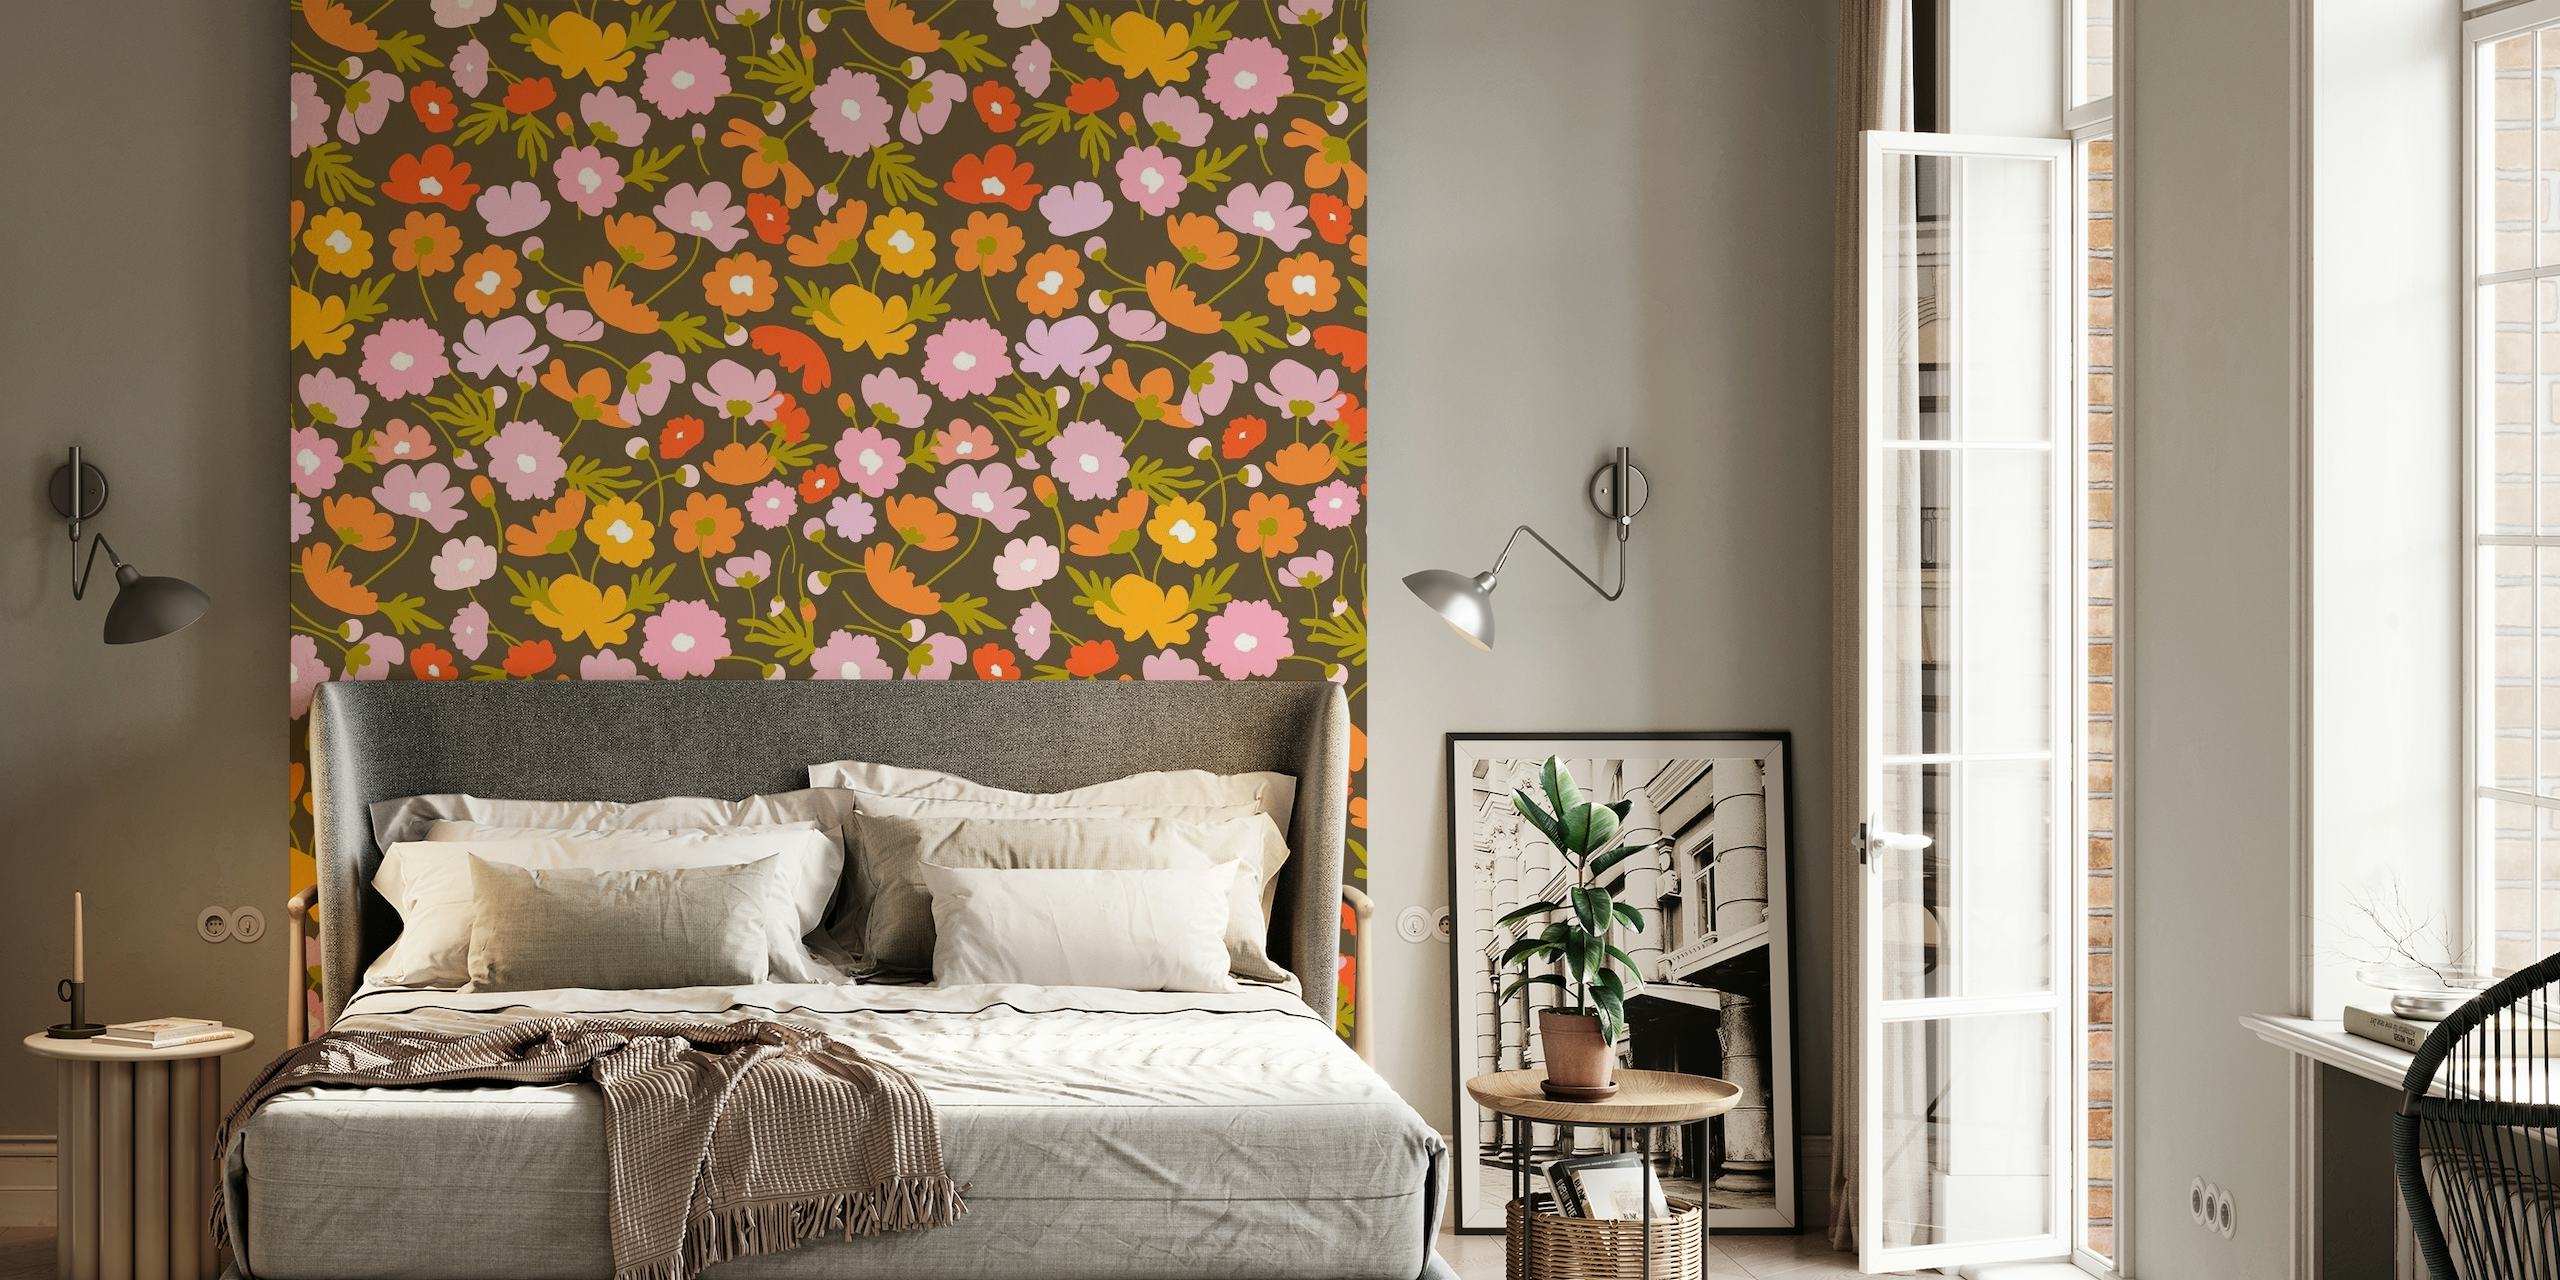 Leilani floral wall mural with daisy-like flowers and rich foliage